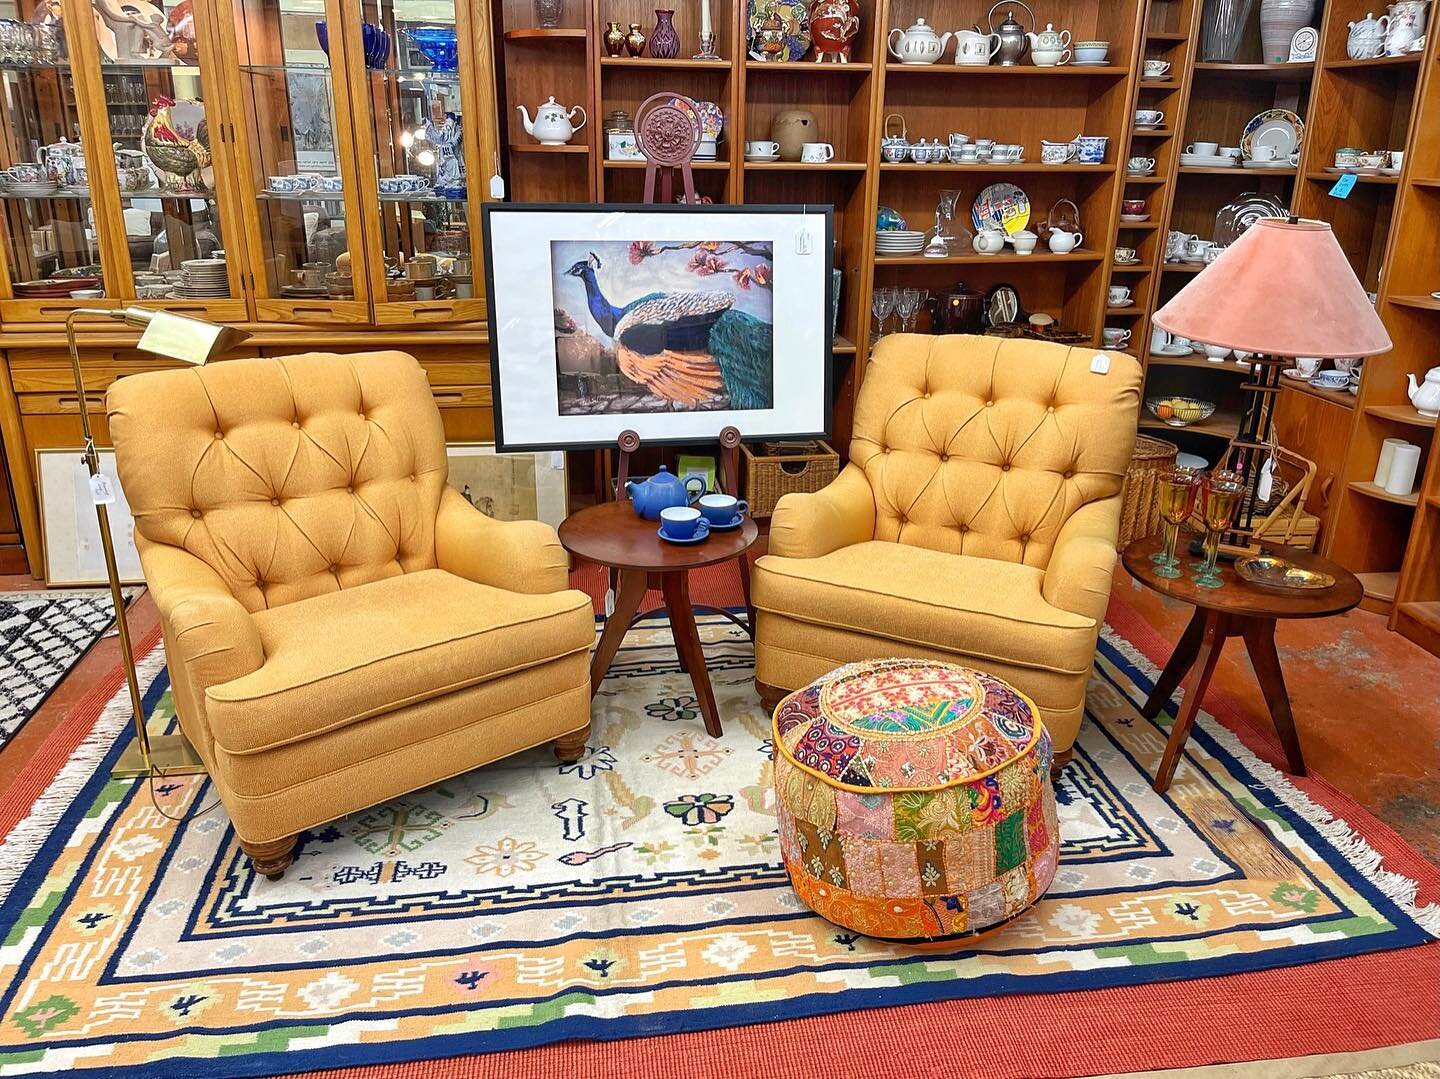 👏👏 twice as nice with 2️⃣ @ethanallen arm chairs! We&rsquo;re here until 5pm, come on in 😎
.
.
#armchair #armchairdesign #ethanallen #armchairs #thriftstorefinds #thriftedhome #livingroom #livingroomdesign #livingroomstyle #peacock #bostoninterior